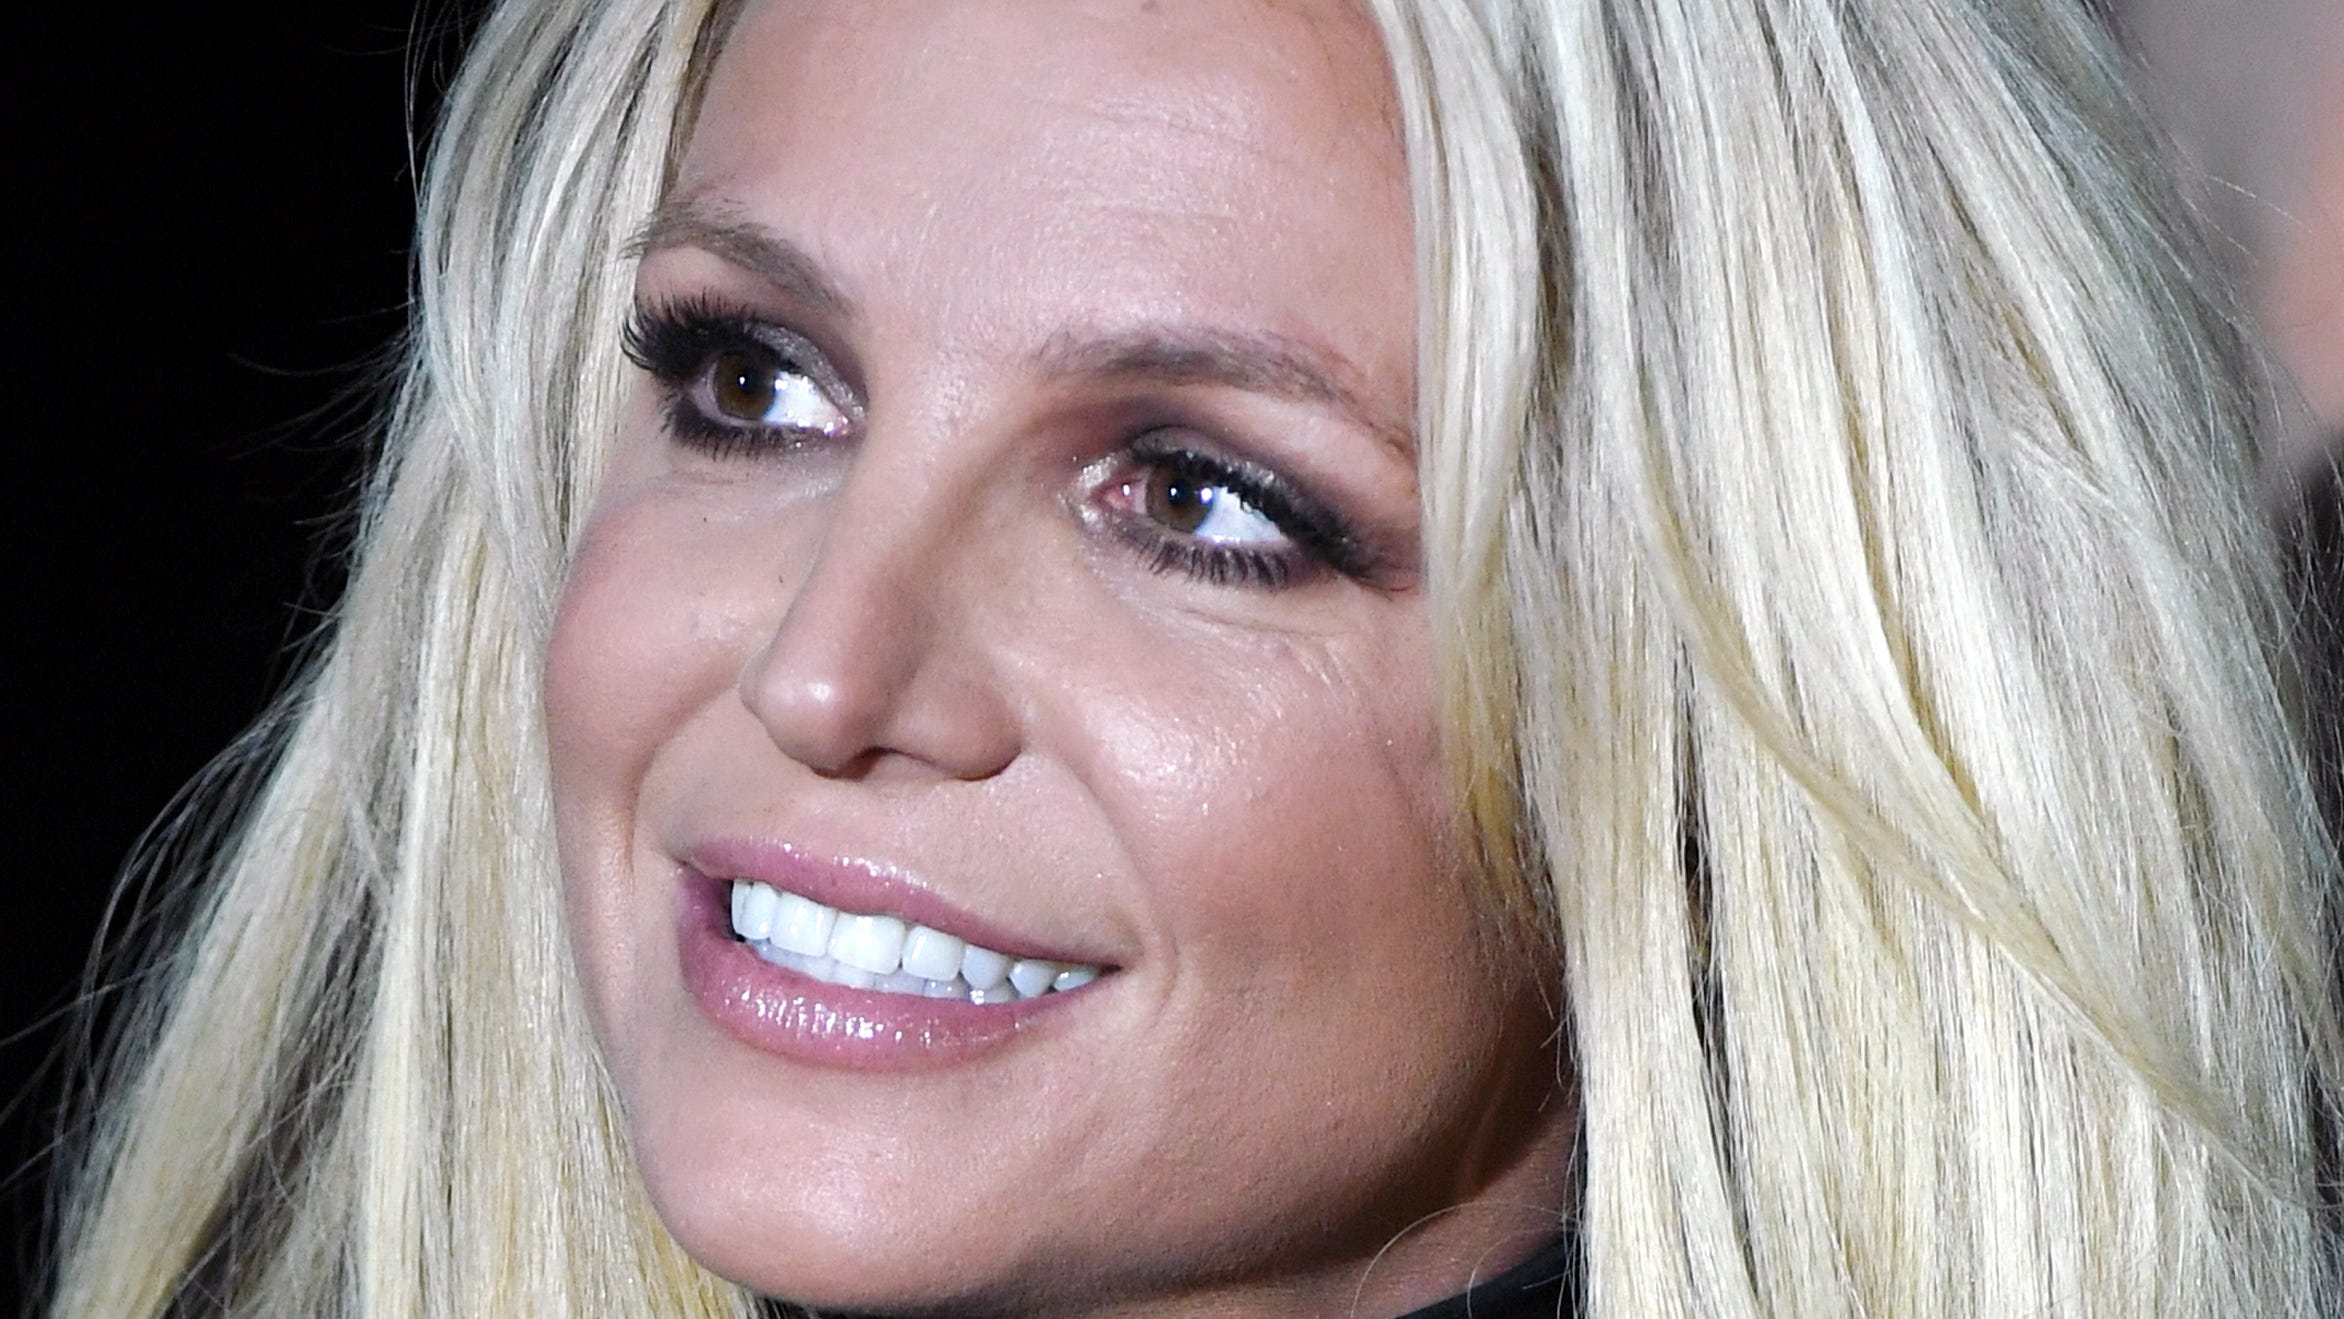 Britney Spears On Instagram Says She Suffers Stress And Headaches